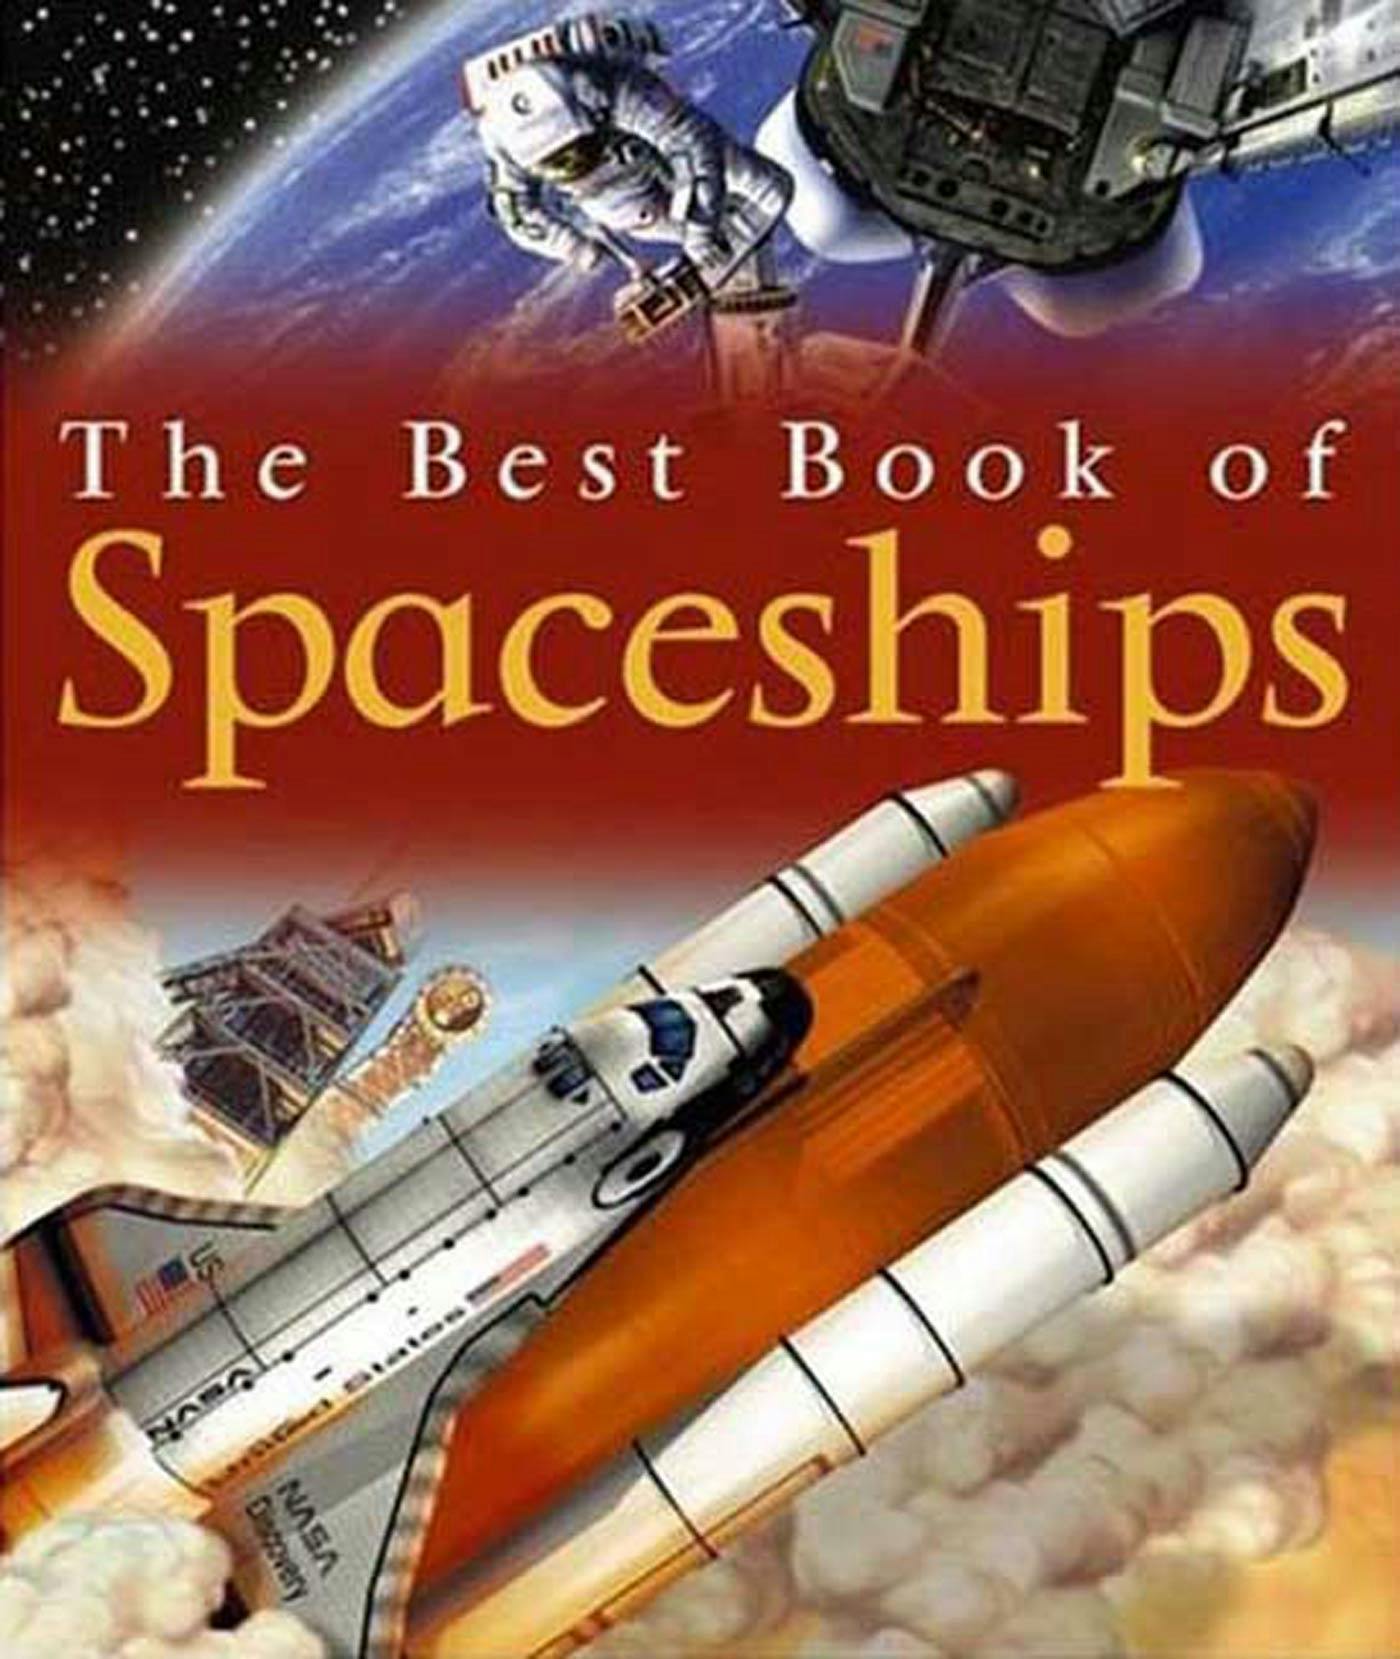 Image of The Best Book of Spaceships